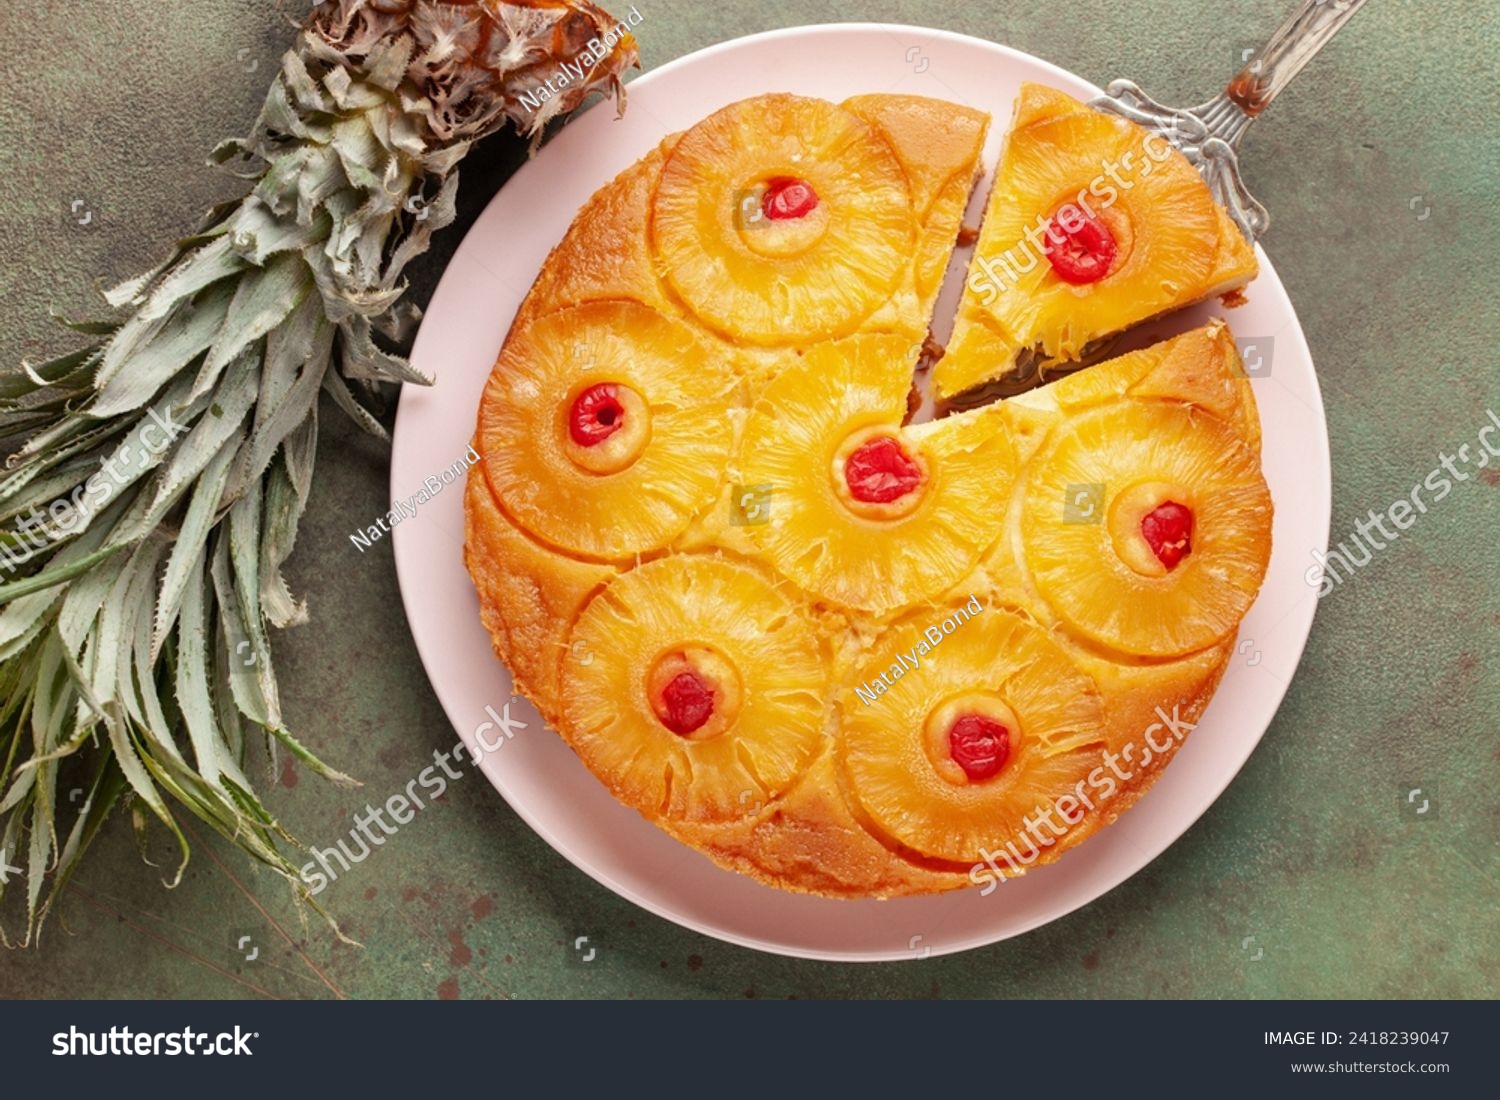 Homemade pineapple upside down pie with candied cherries . Tropical dessert on green background. Top view #2418239047